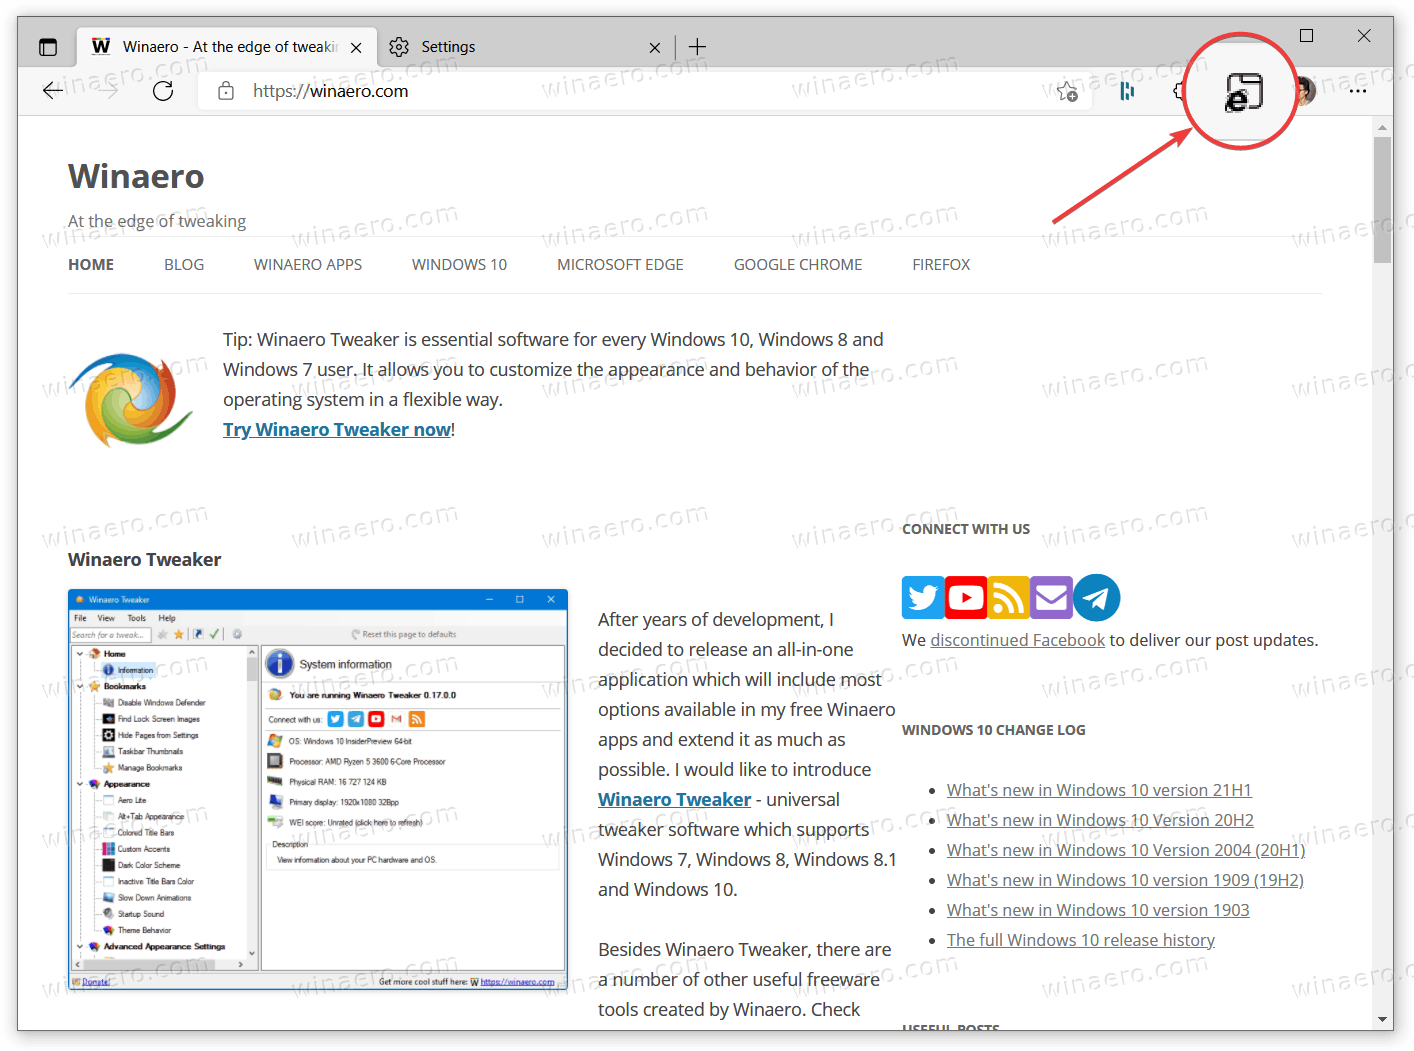 IE Mode Toolbar Button In Edge